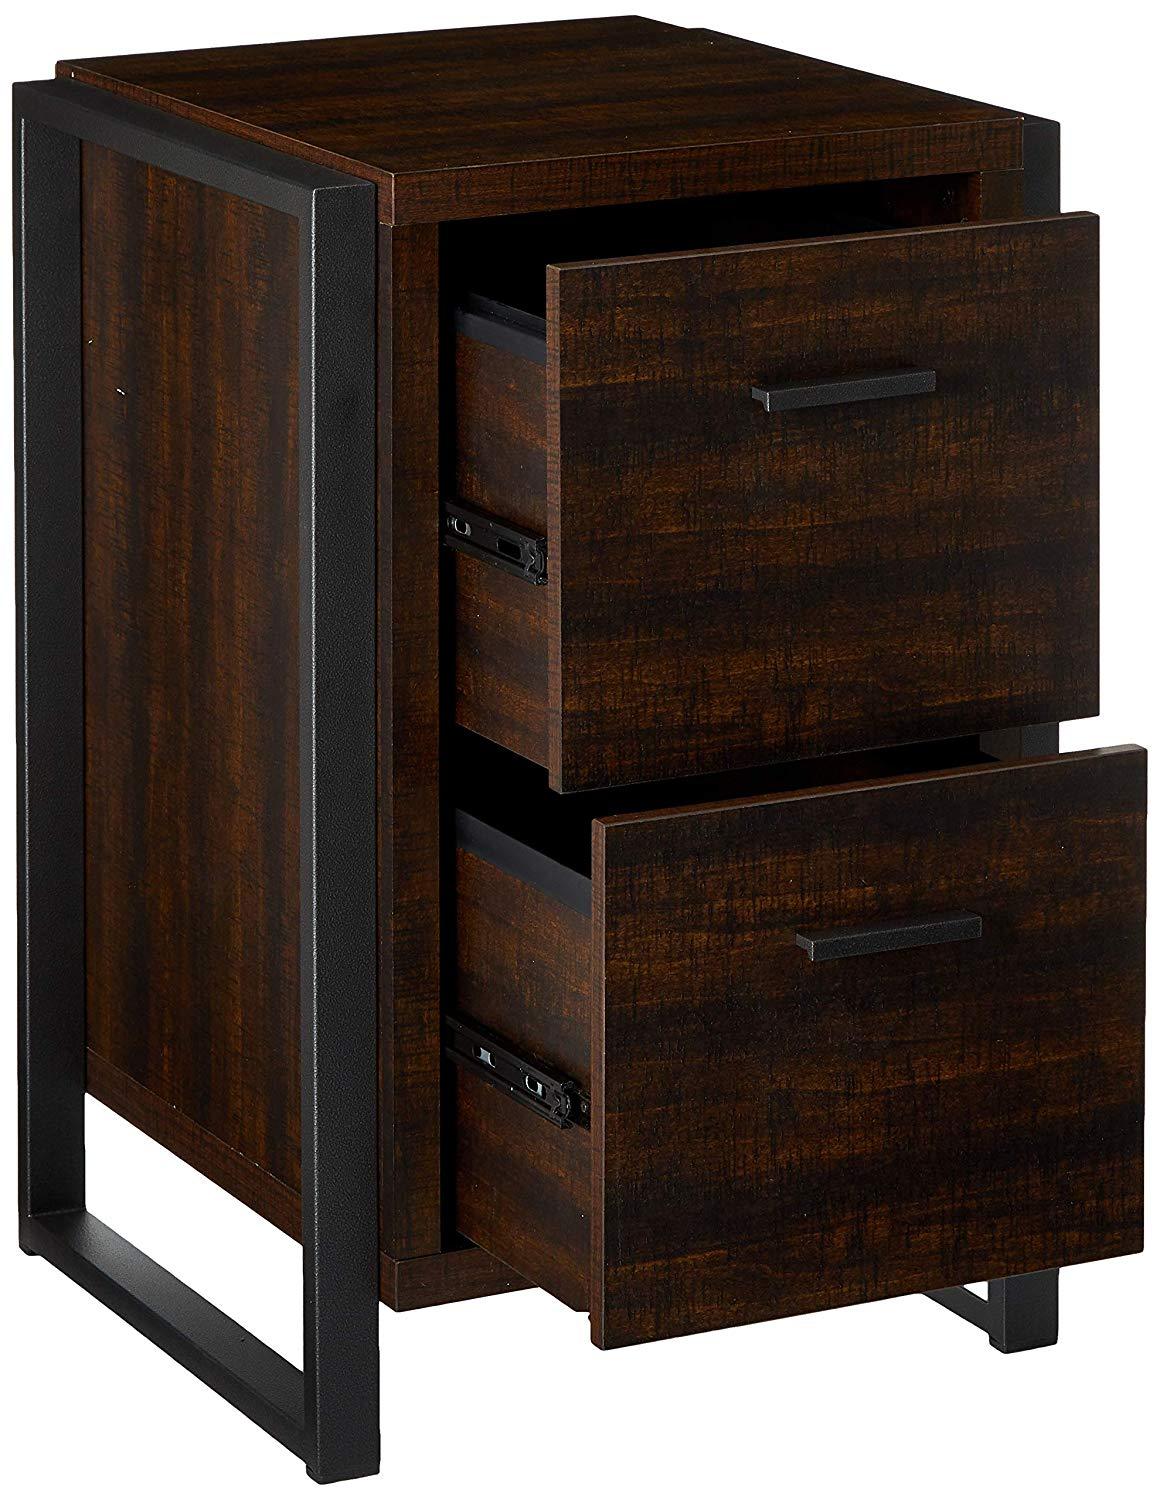 Home Office Filing Cabinets - Filing Cabinets